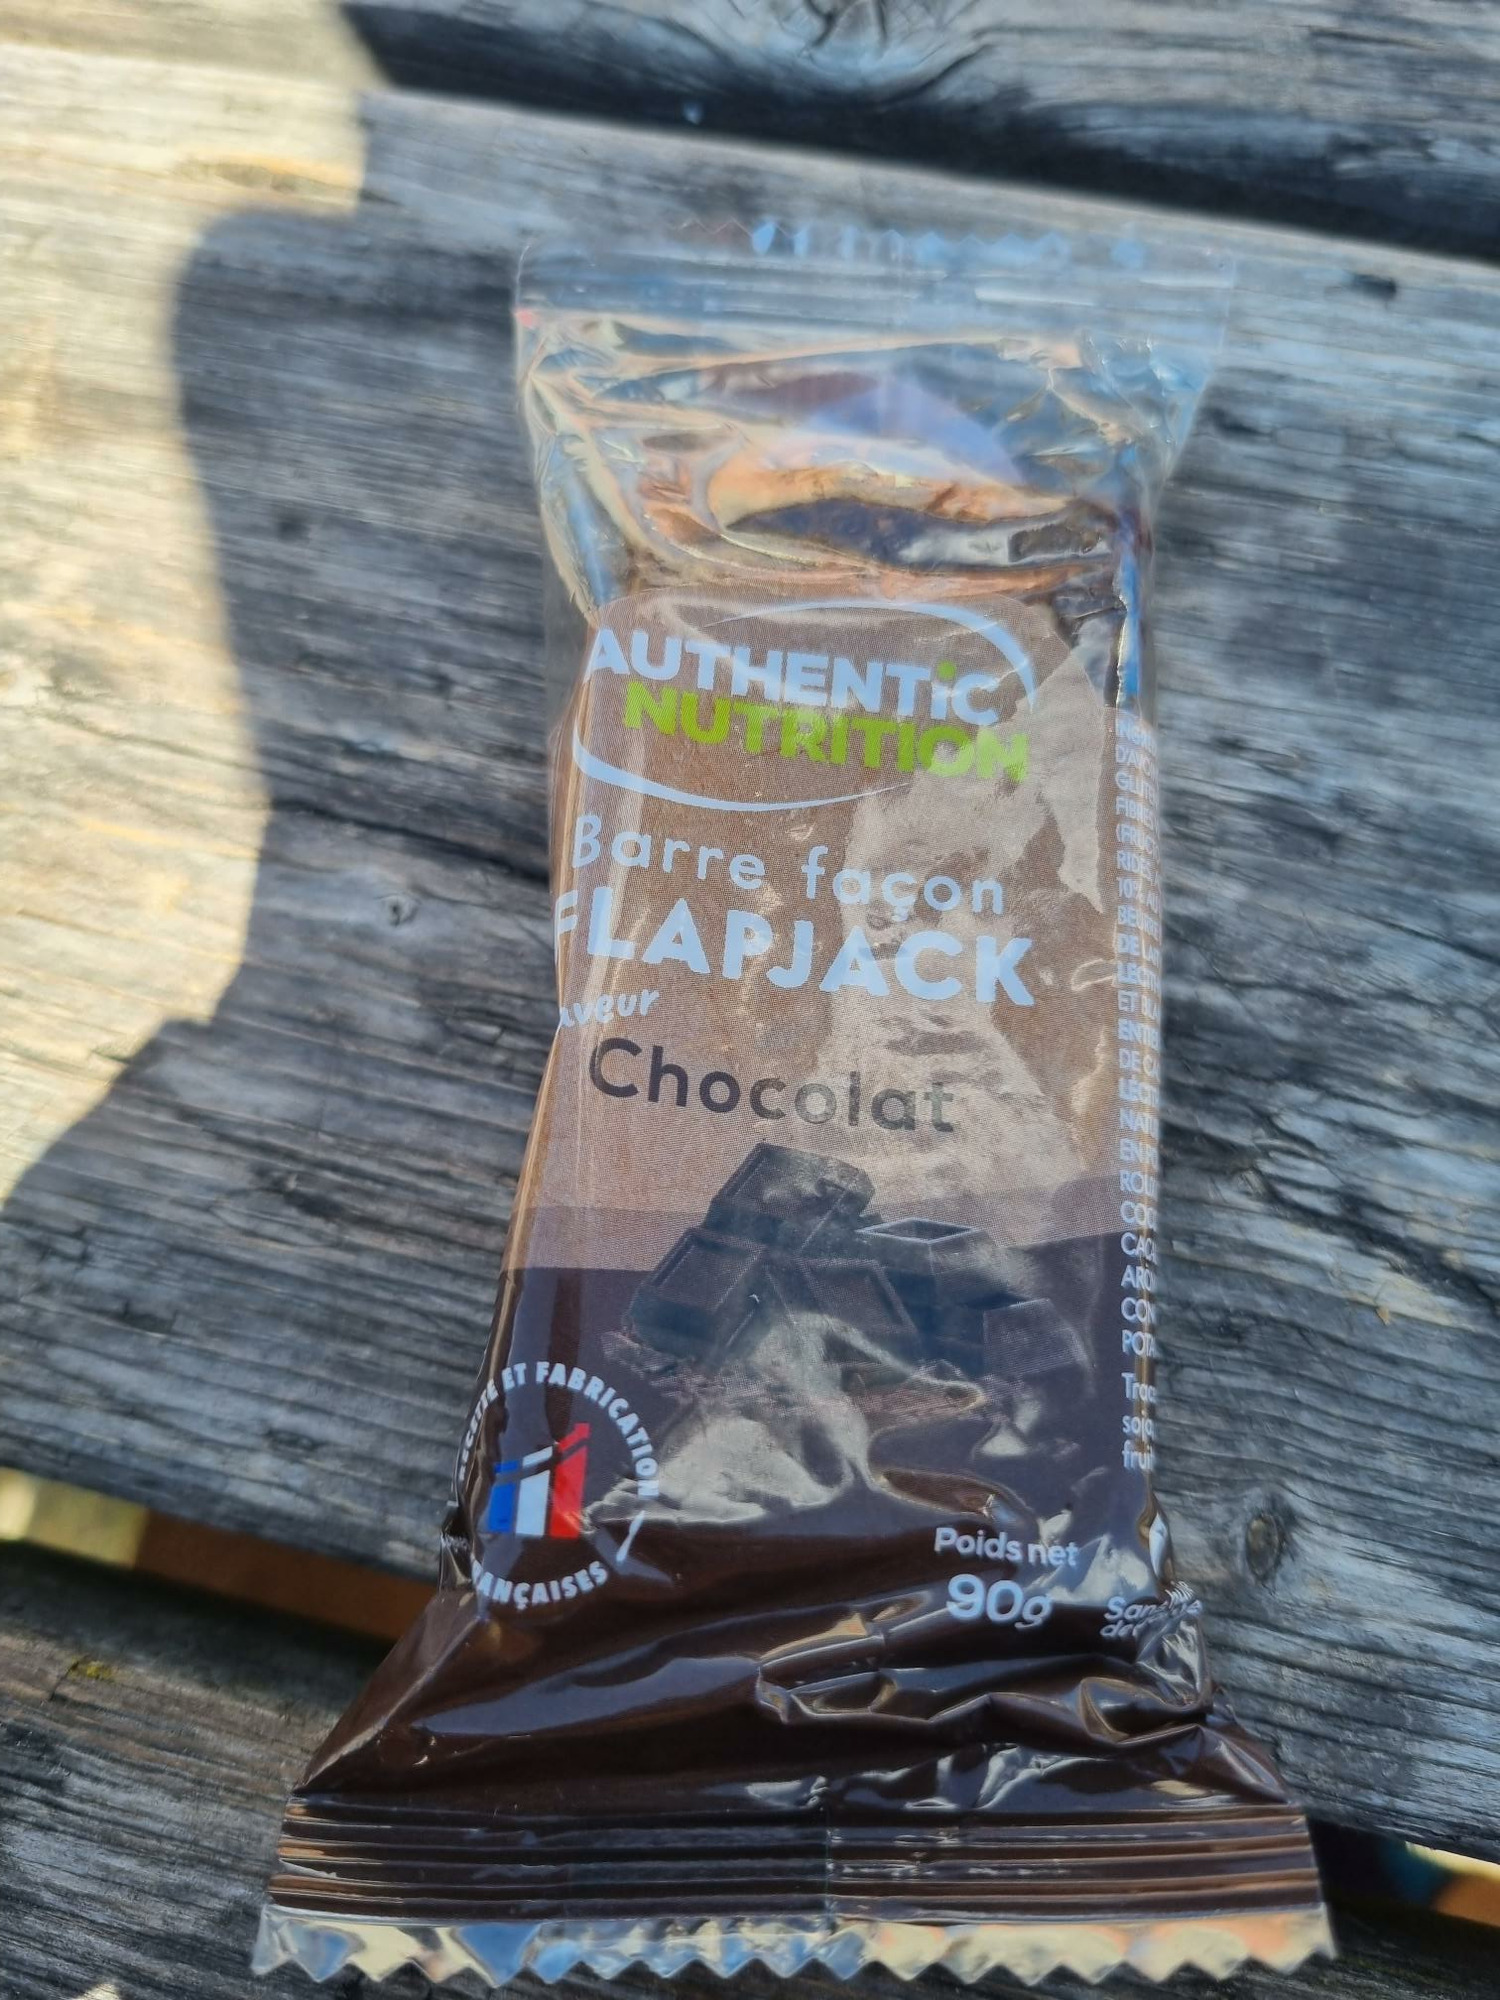 Authentic Nutrition Barre Flapjack